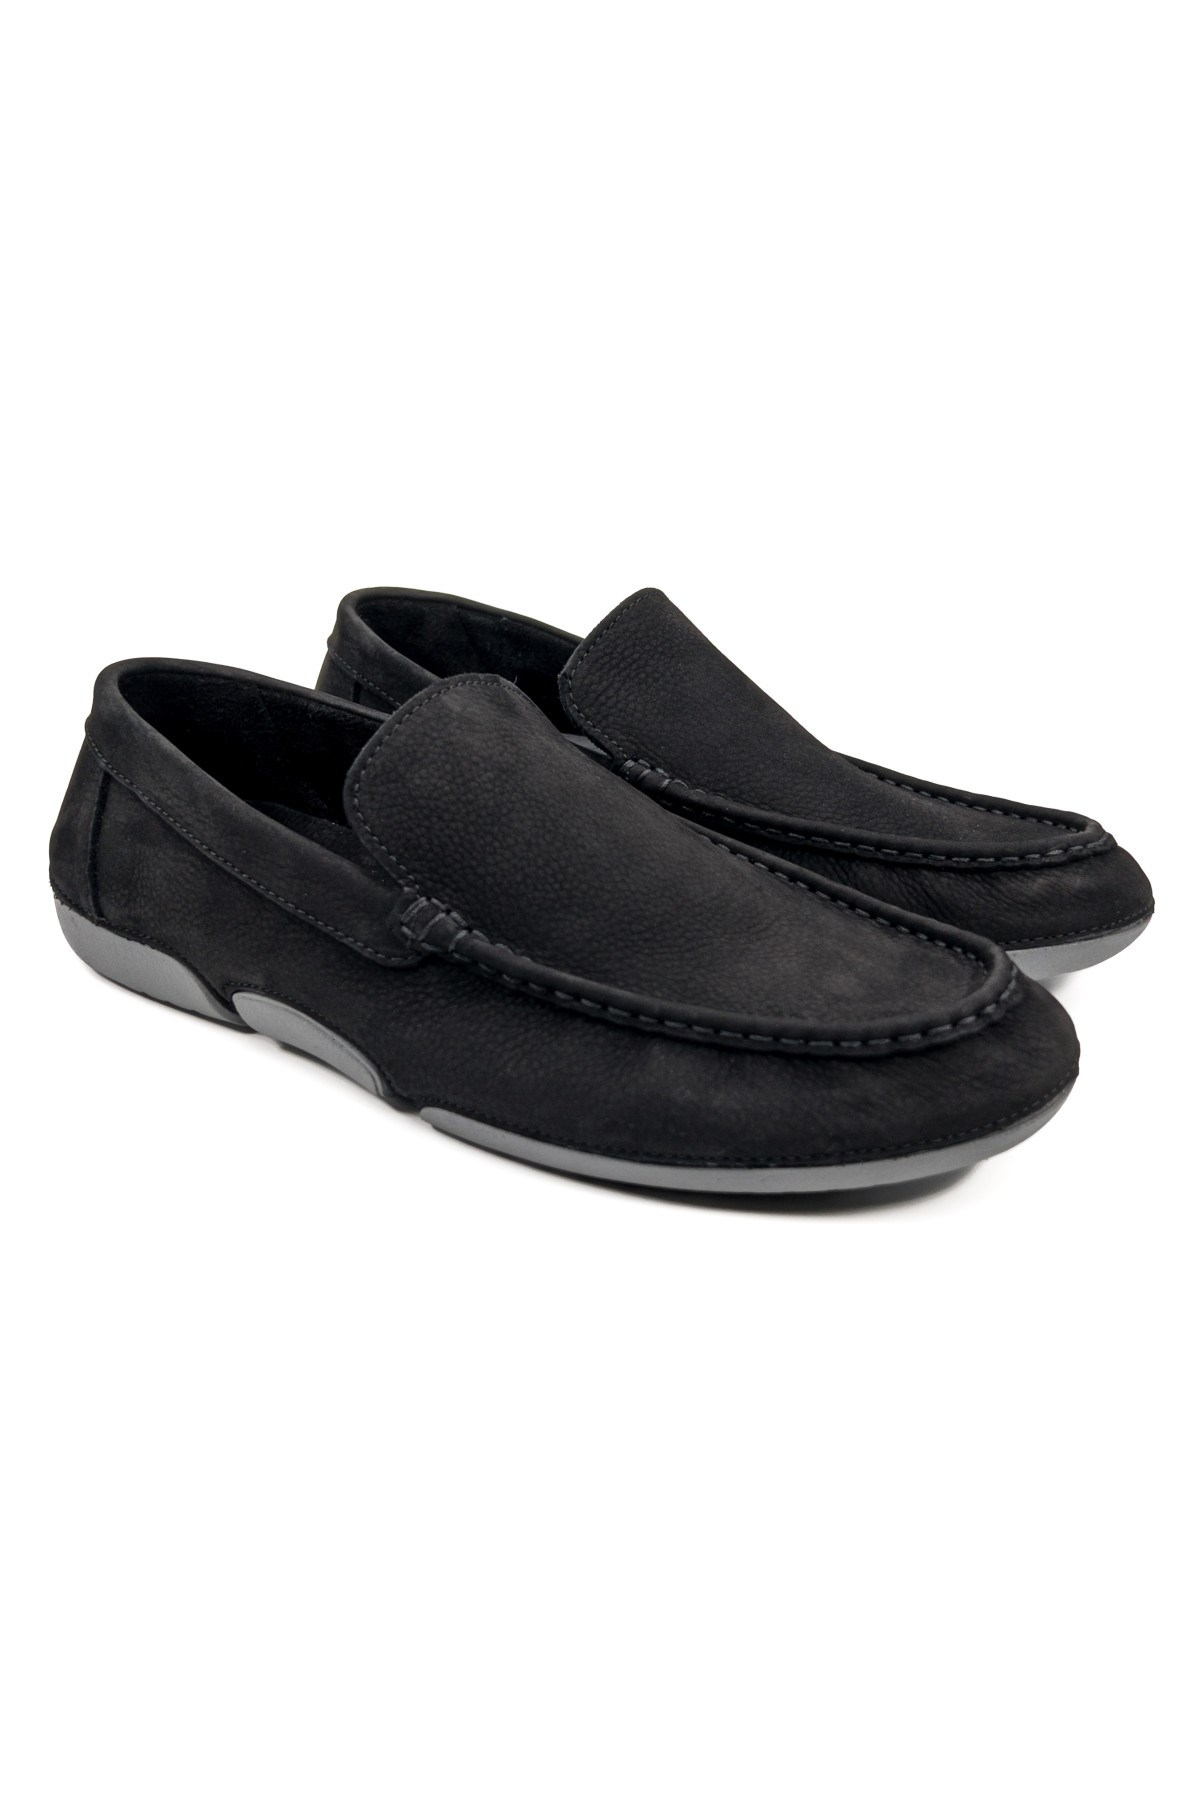 Olympos Inside Outer Genuine Nubuck Leather Black Men's Shoes Loafer